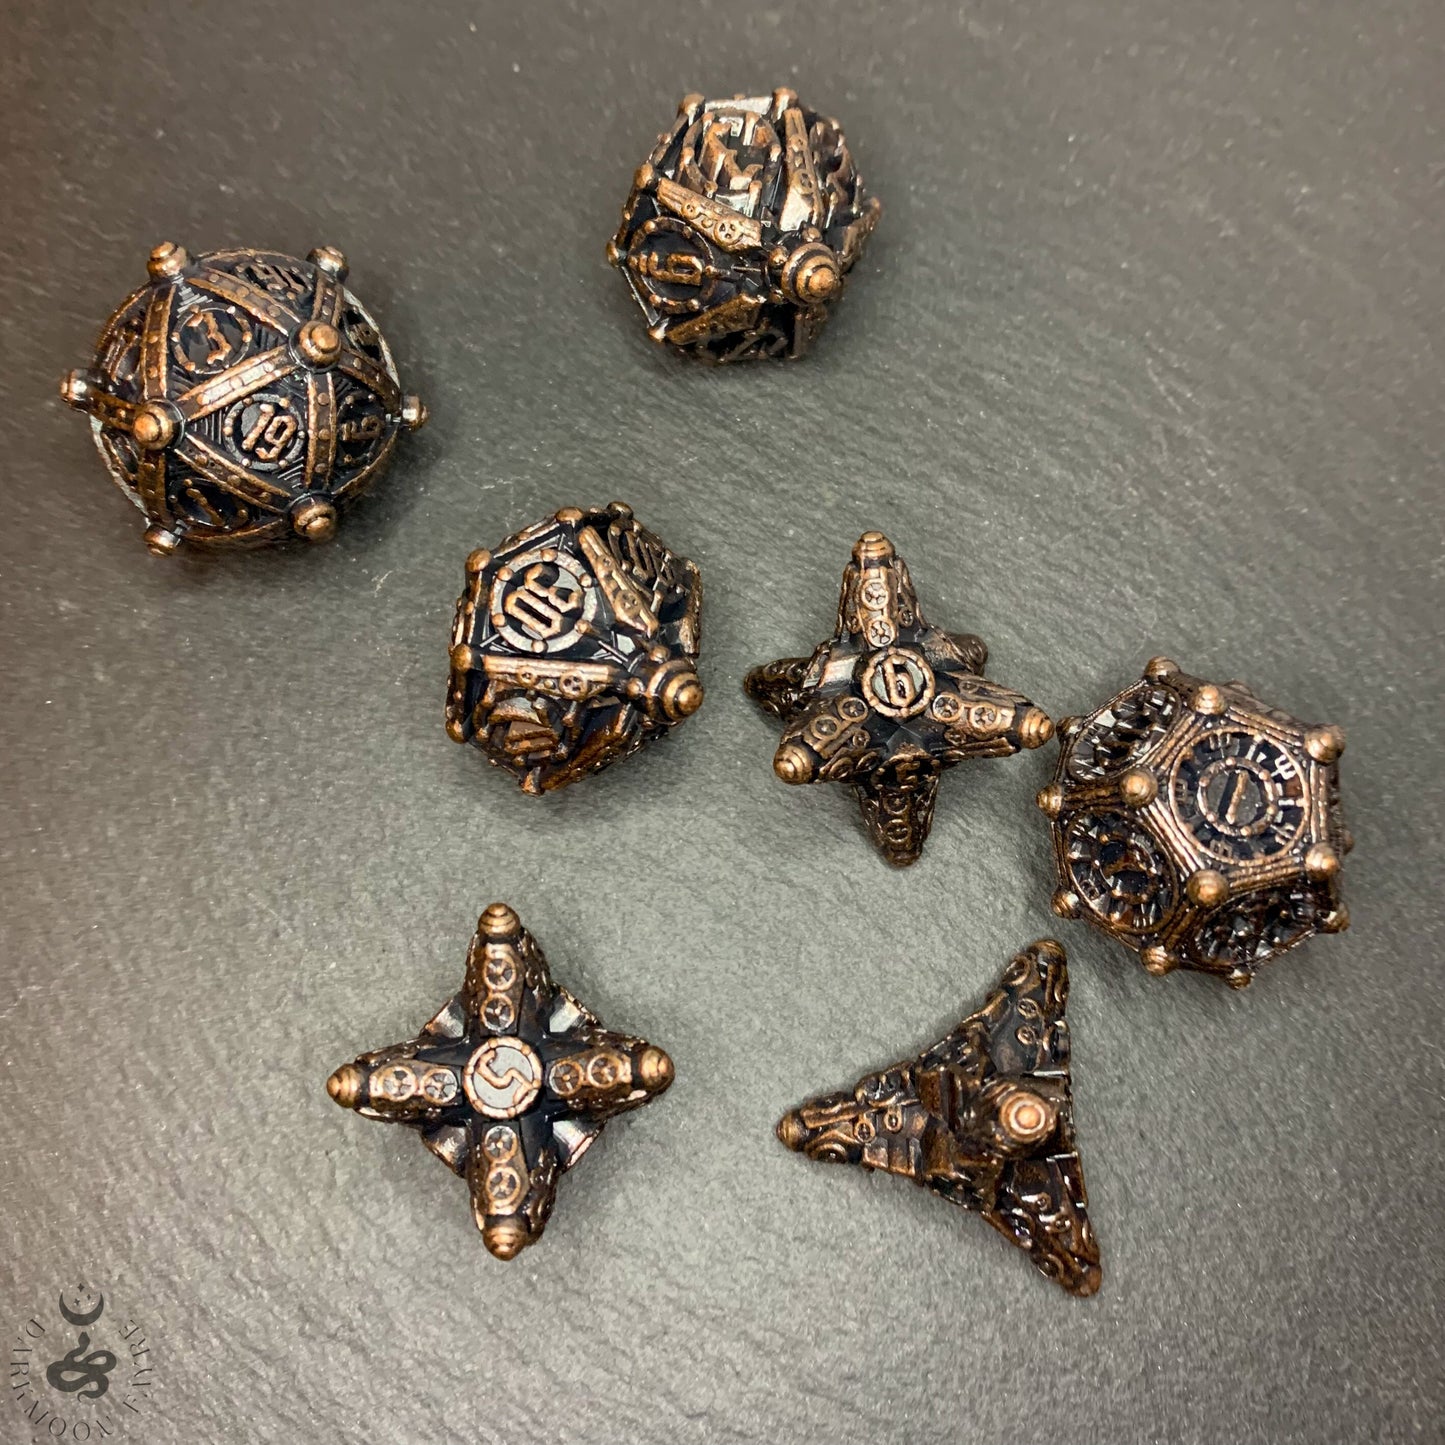 DnD 7 Copper Ancient Mechanical Solid Heavy Metal Polyhedral Dice Set With A Fairtrade Cotton Storage Pouch - Darkmoon Fayre